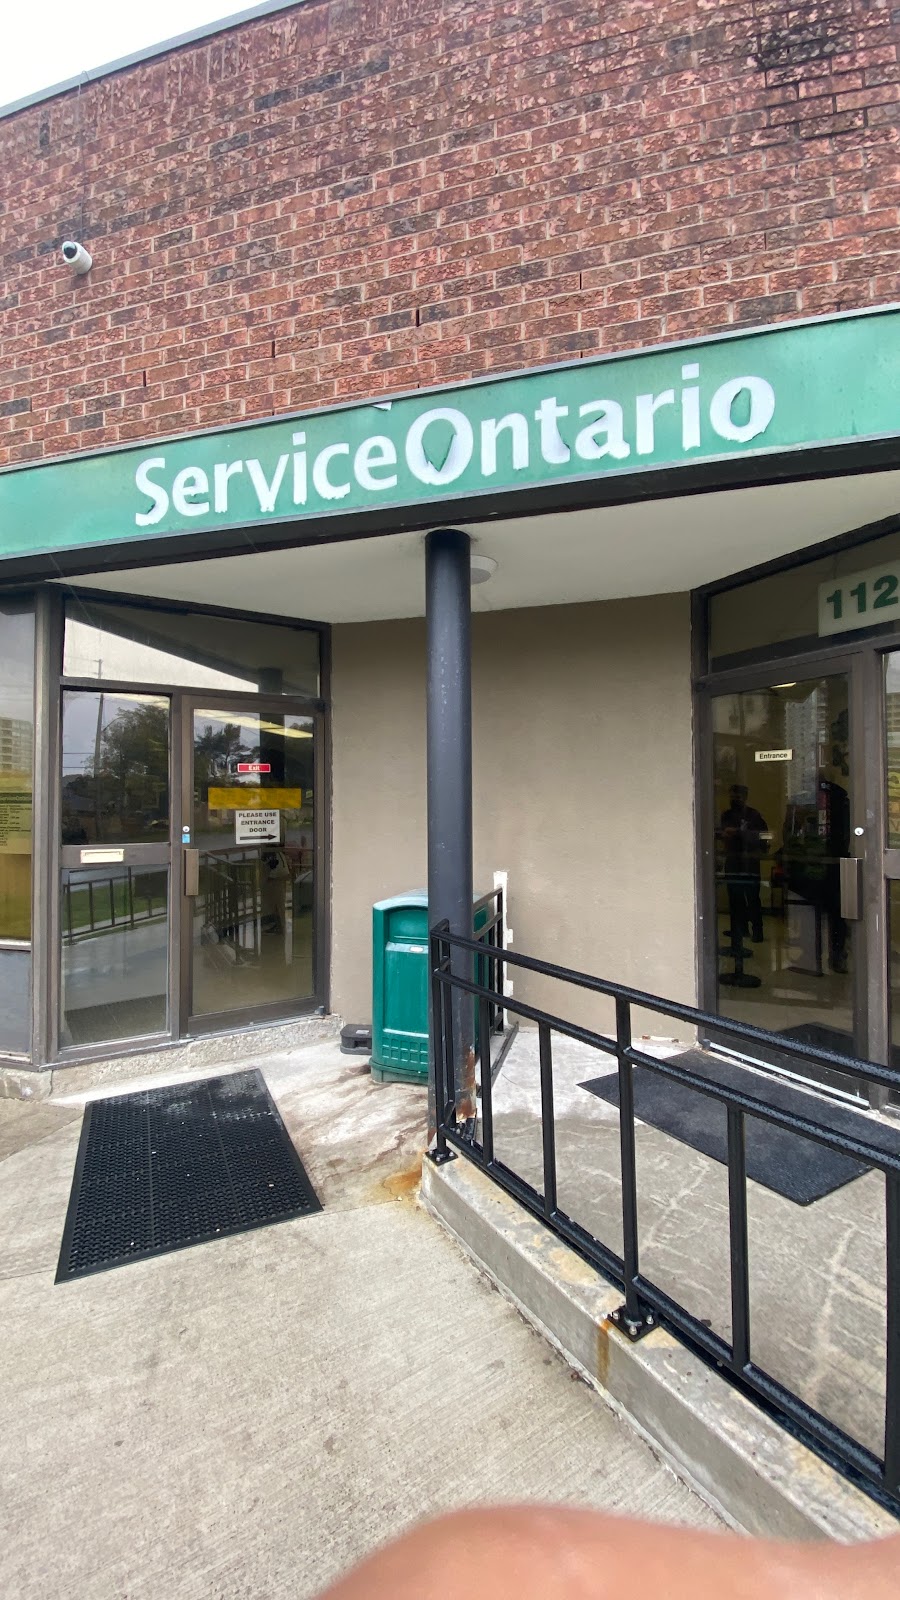 ServiceOntario | sheppard mall, 4800 Sheppard Ave E Unit 112, Scarborough, ON M1S 4N5, Canada | Phone: (416) 335-1705